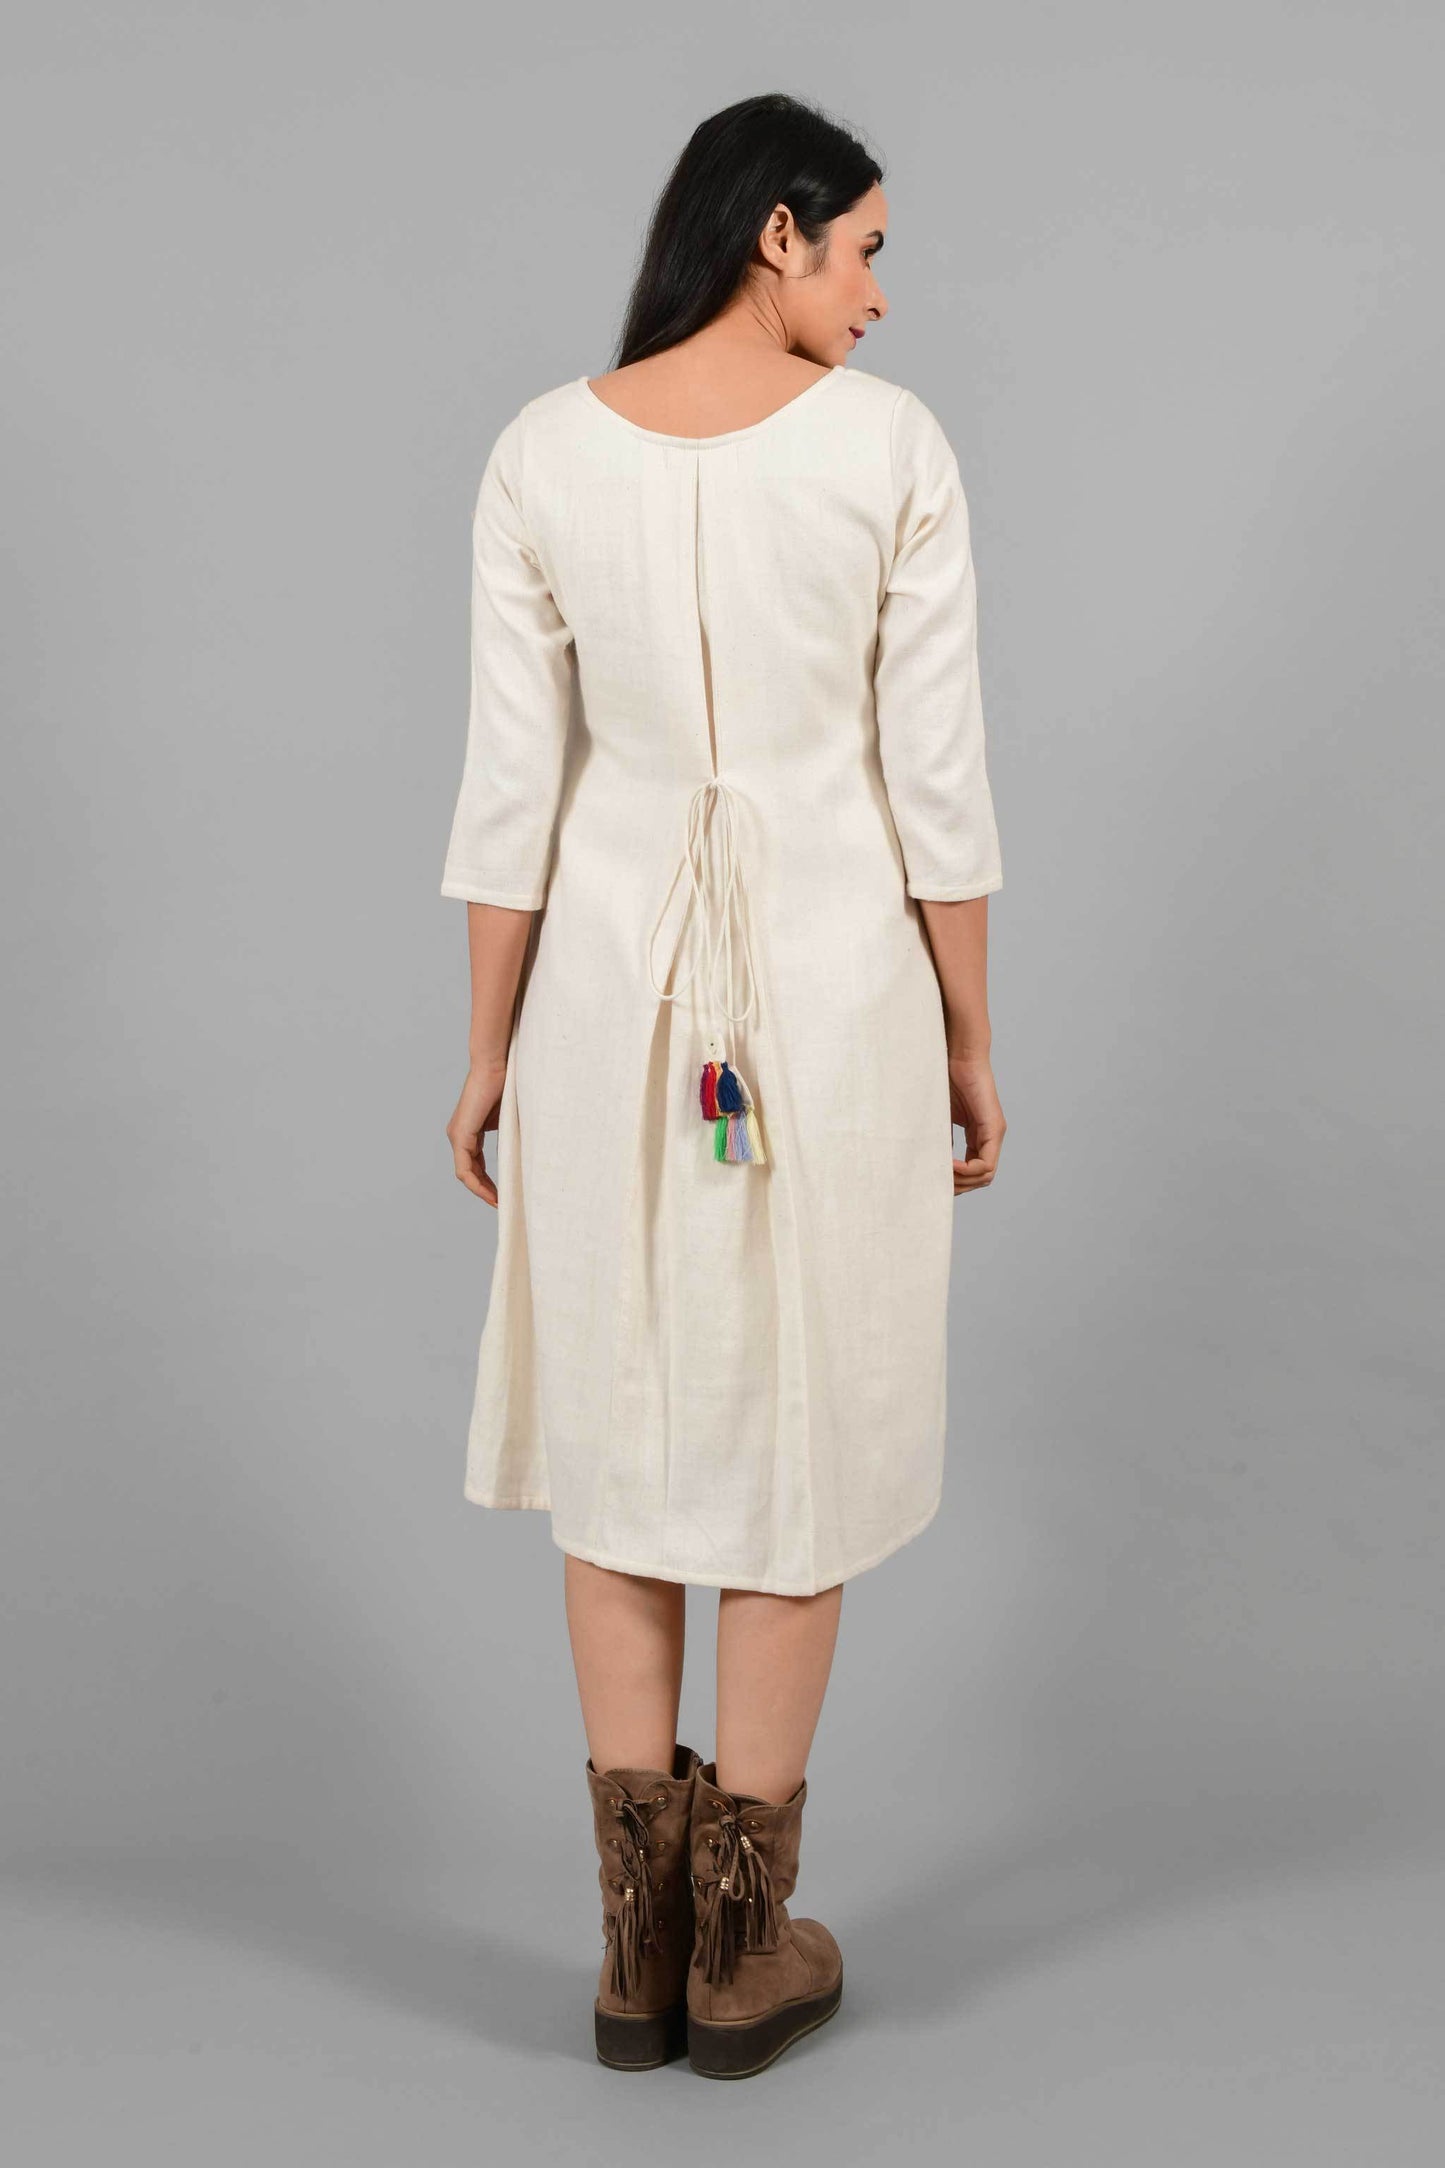 Back pose of an Indian female womenswear fashion model in an off-white Cashmere Cotton A-line Dress with box pleat on the back made using handspun and handwoven khadi cotton by Cotton Rack.